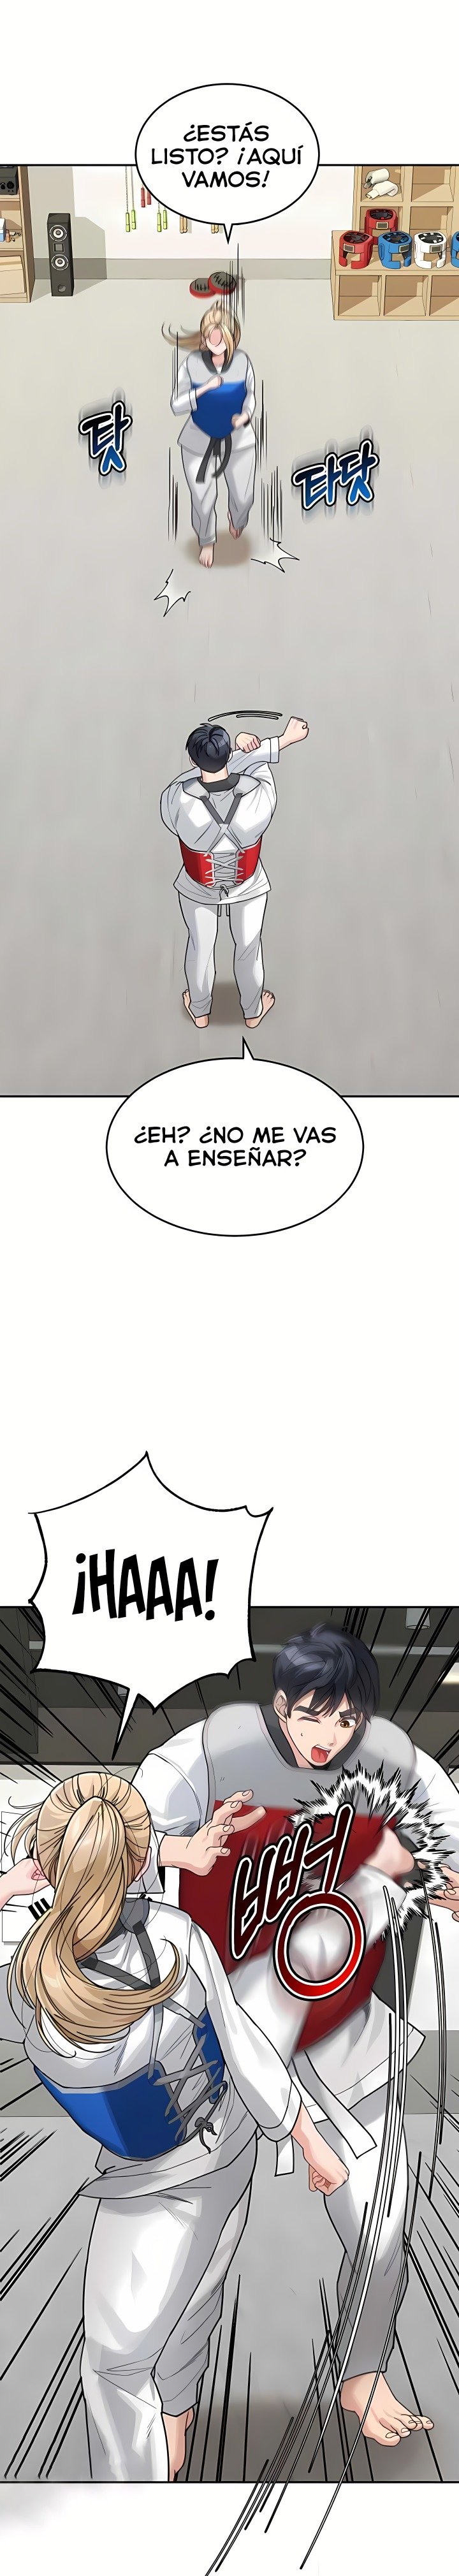 is-it-your-mother-or-sister-raw-chap-30-17